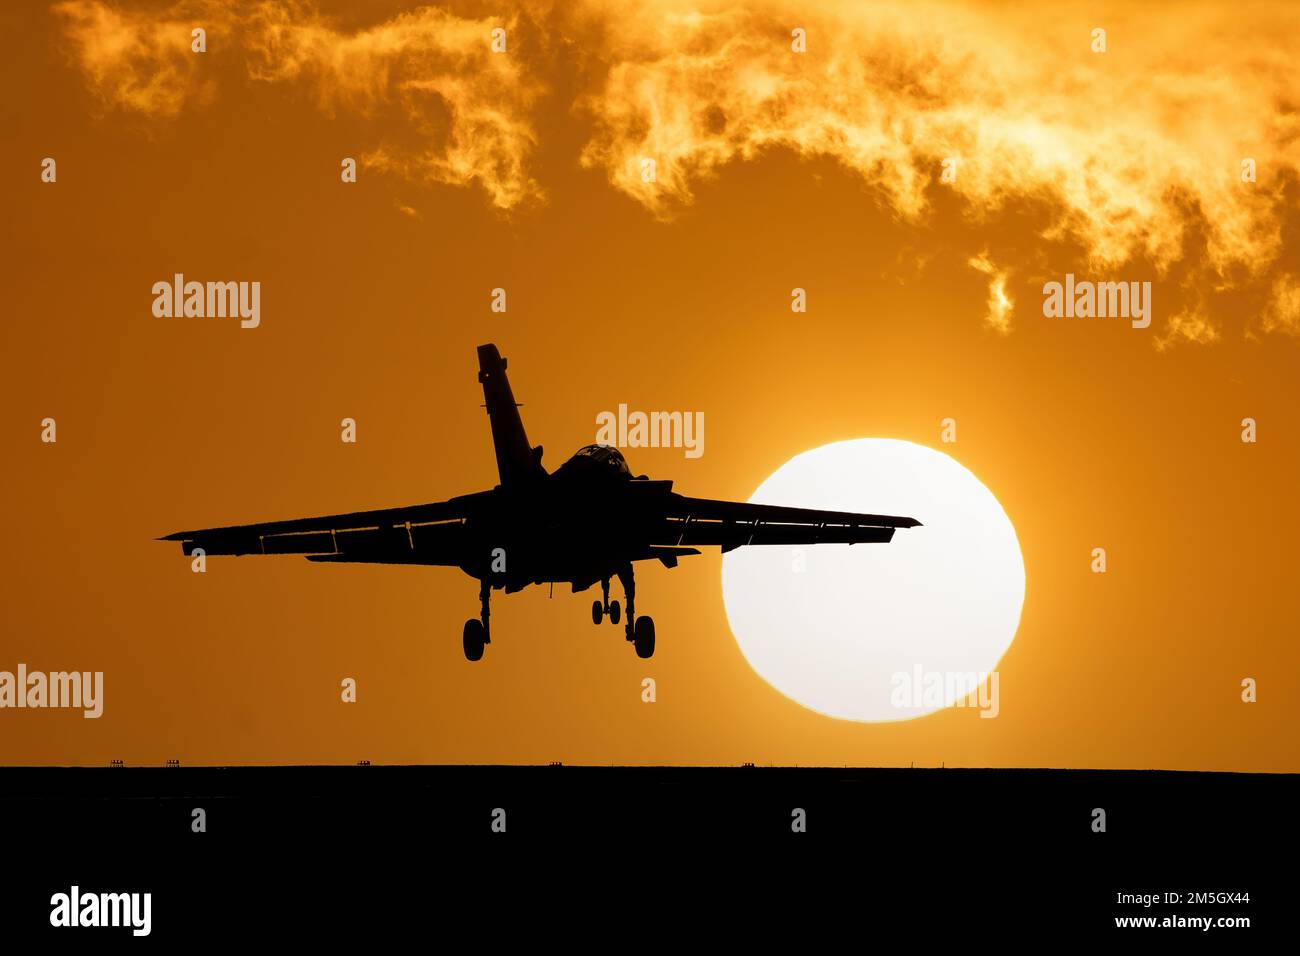 Fighter jet landing at sunset with orange sky and large setting sun after a combat mission. Tornado Fighter Bomber Stock Photo